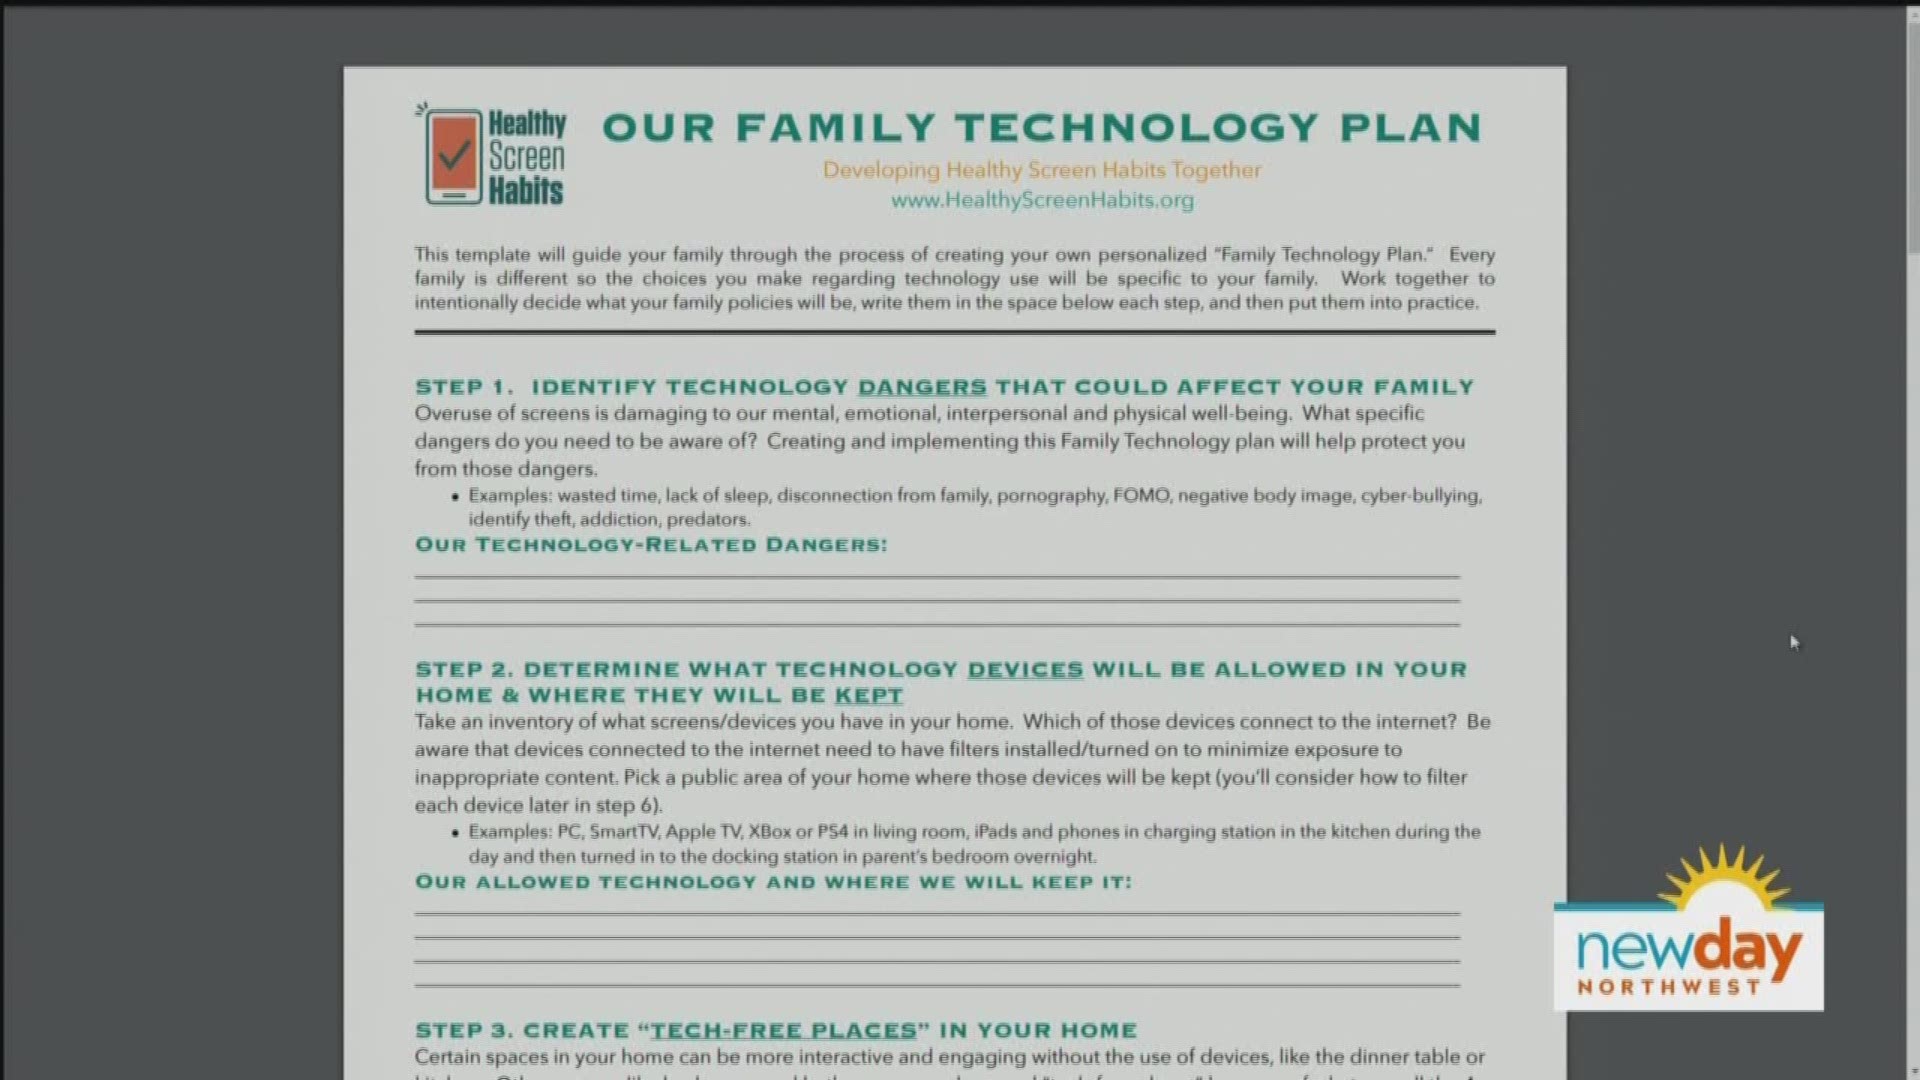 If families can work together to create a tech plan with mutually agreed-upon expectations, the benefits can substantial.